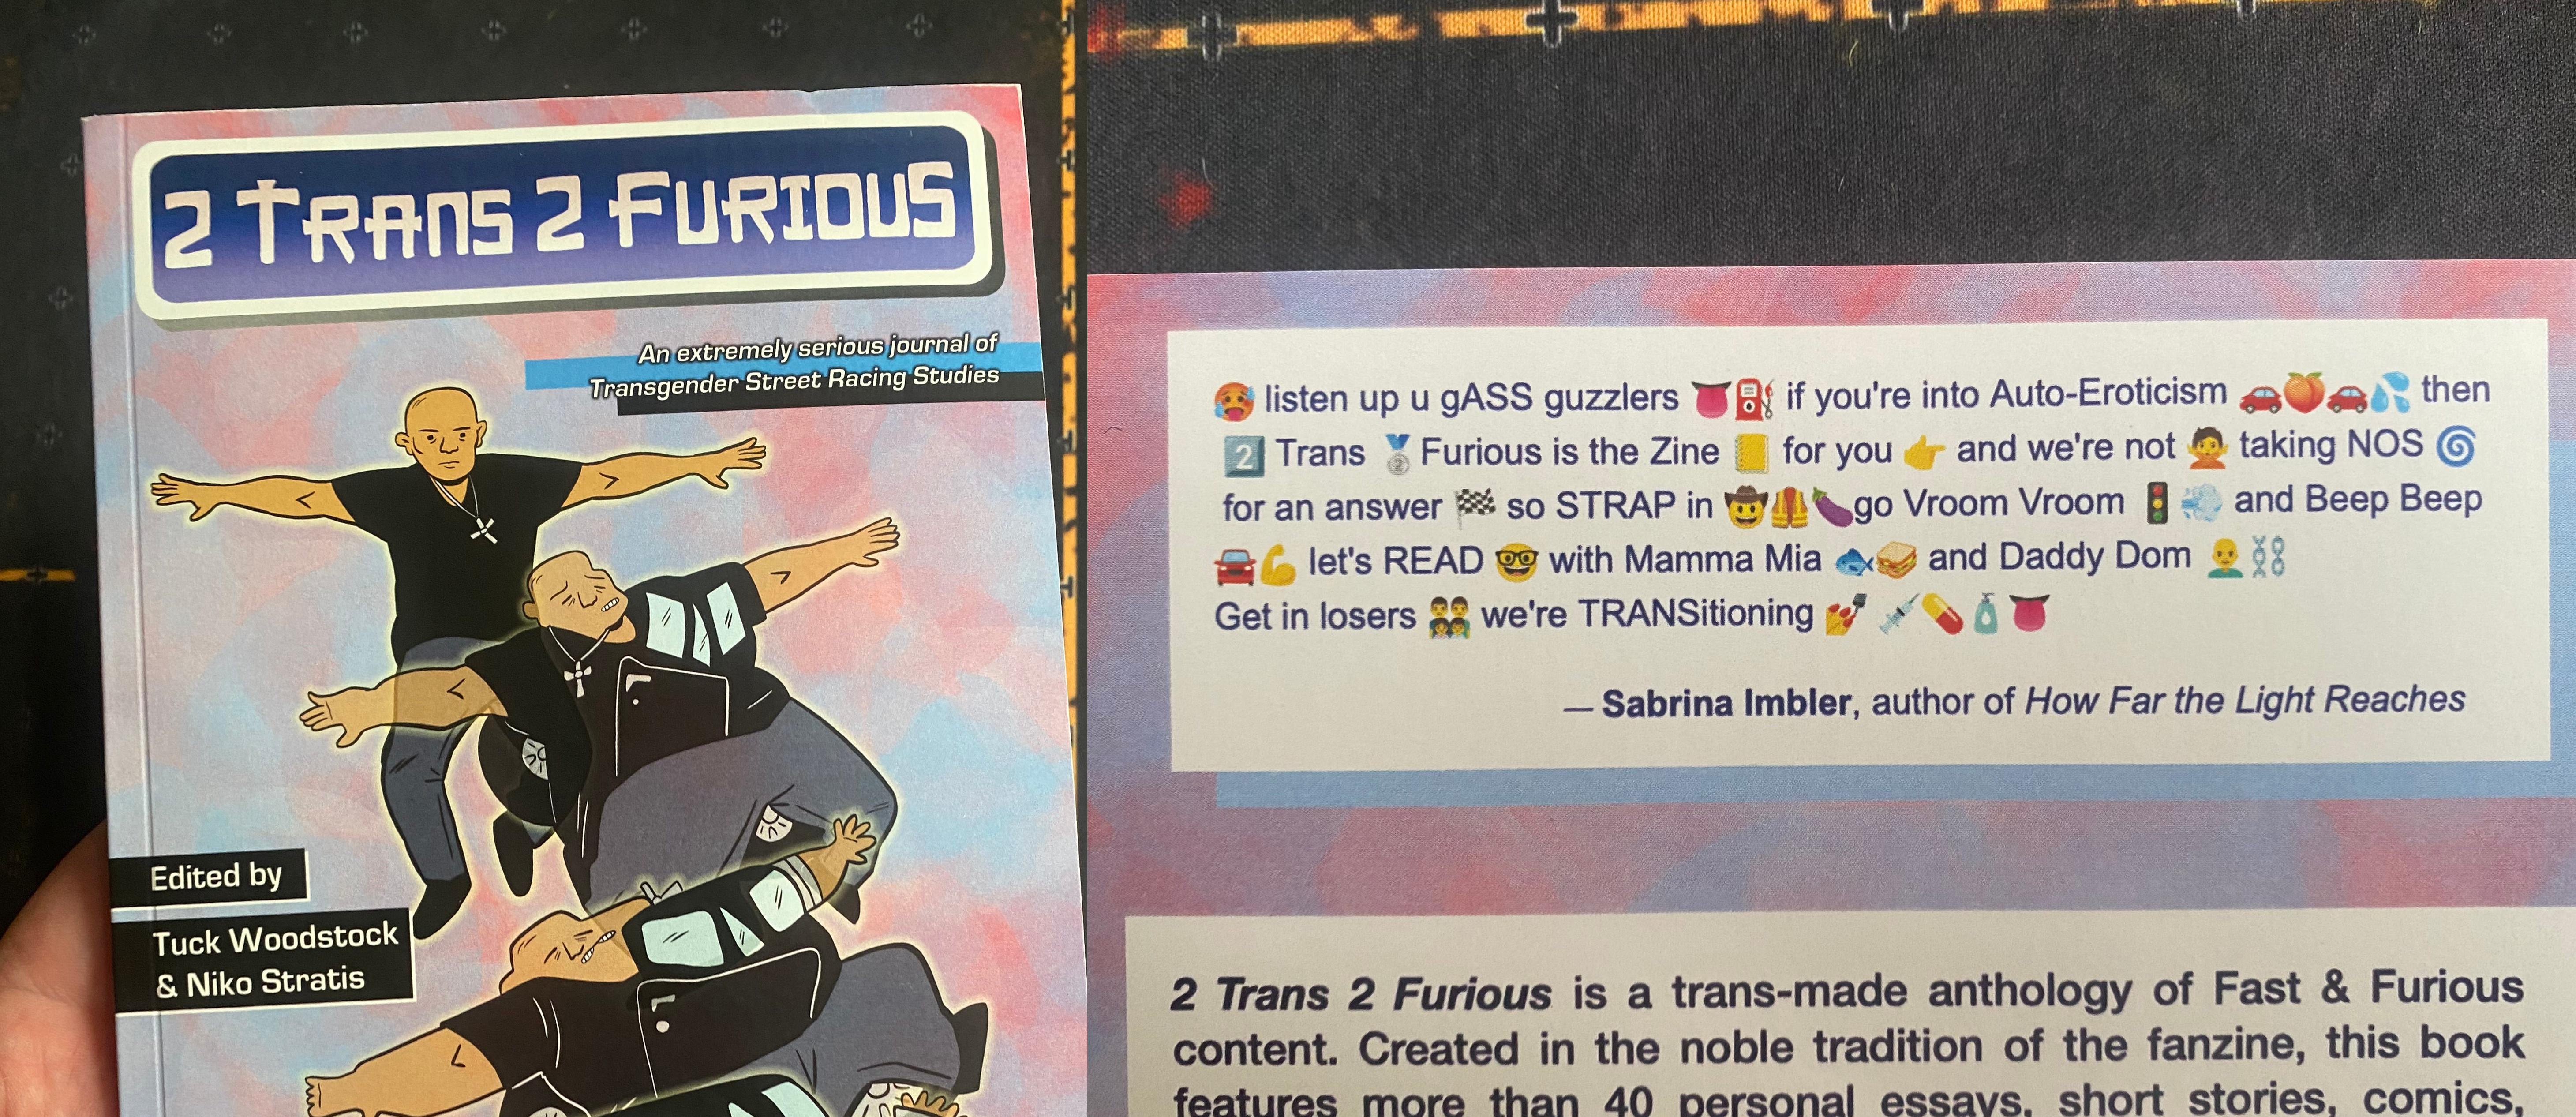 2 trans 2 furious: an extremely serious journal of transgender street racing studies